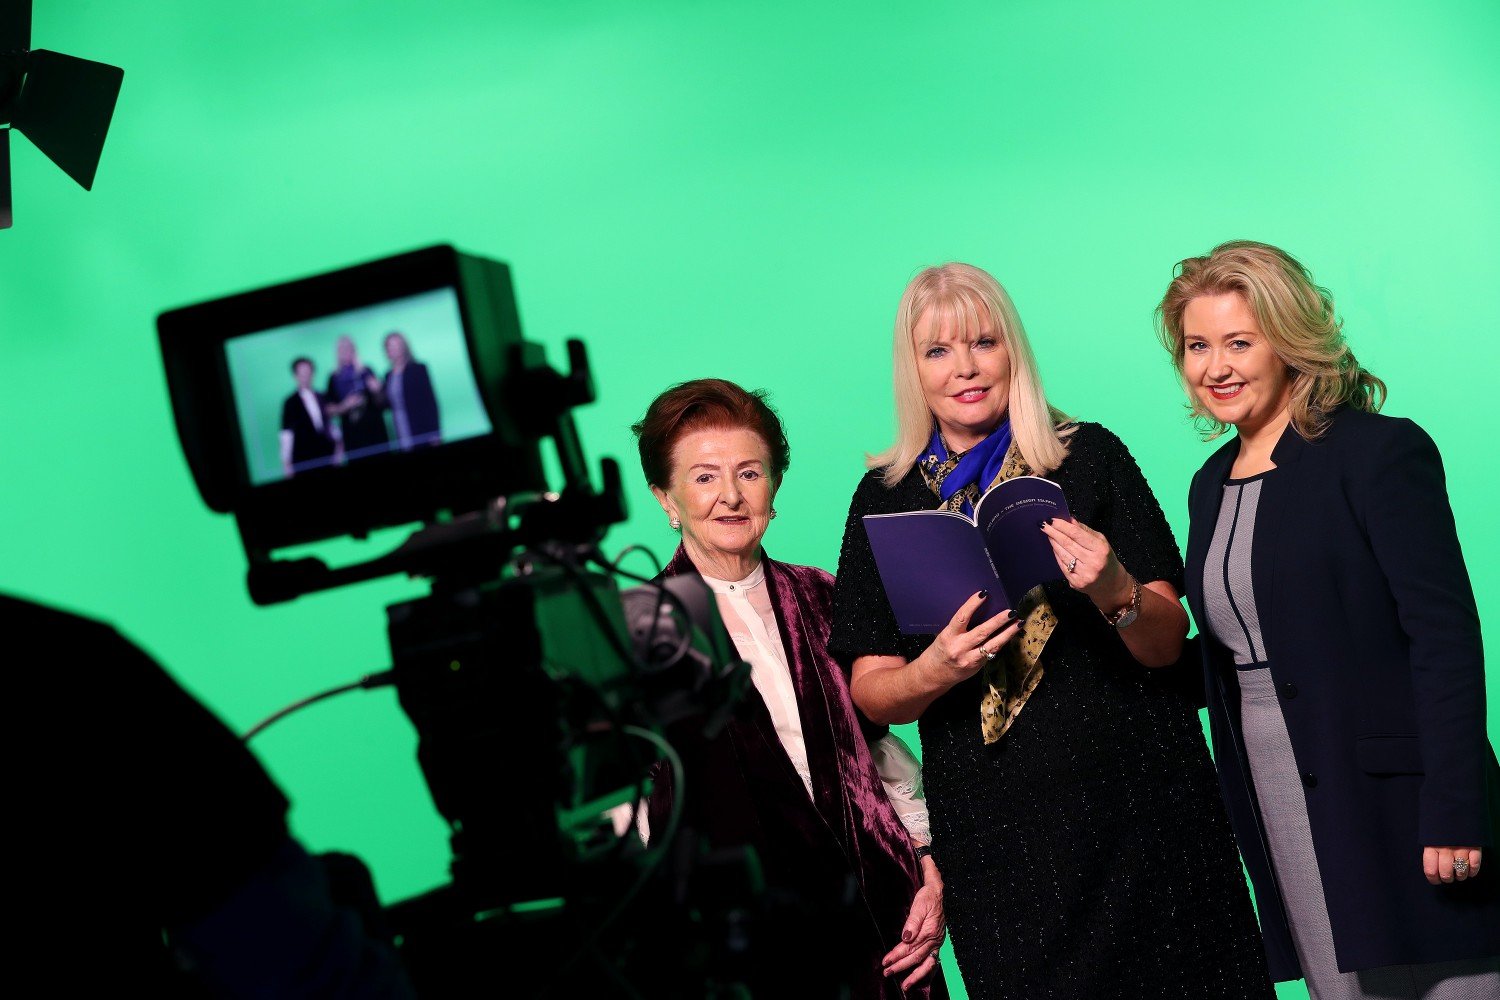 Breege O'Donoghue (Chair, DCCoI), Minister for Jobs, Enterprise and Innovation, Mary Mitchell O’Connor and Karen Hennessy (CEO, DCCoI)